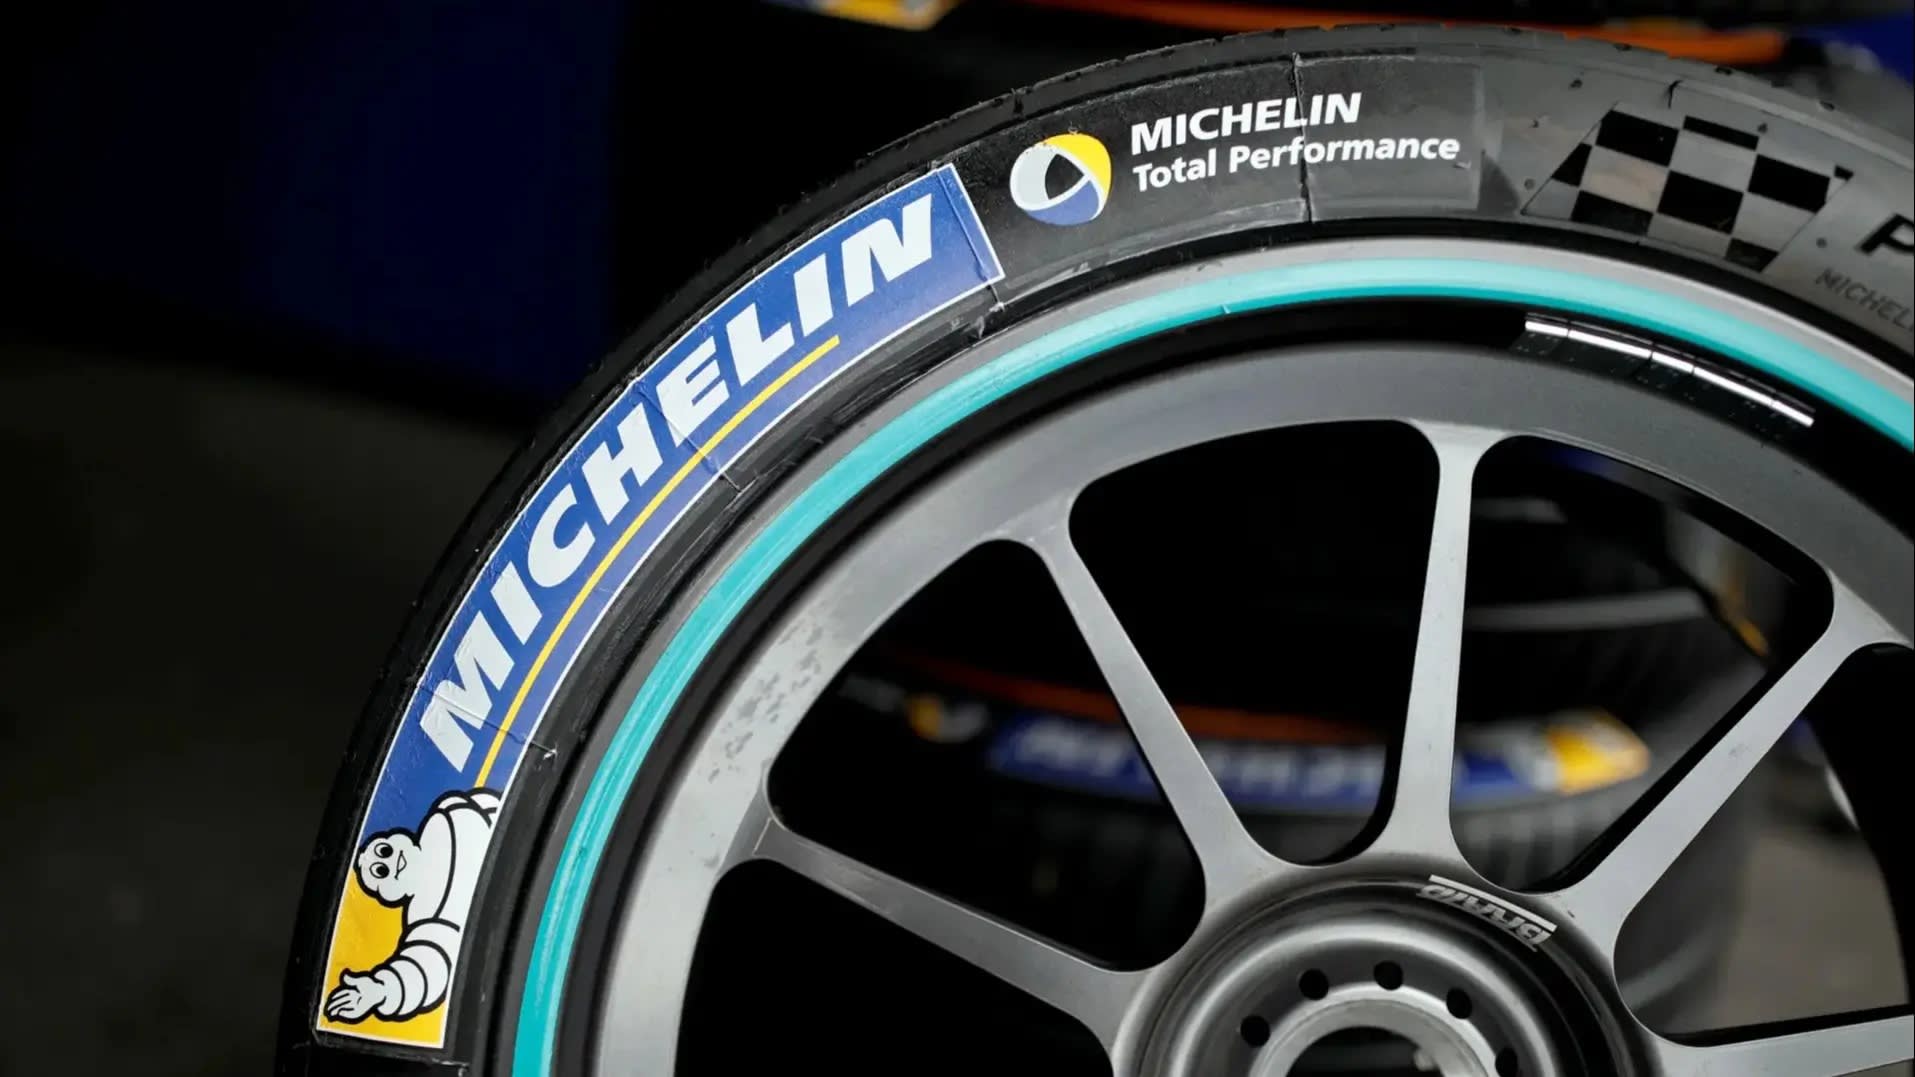 Michelin Ranked as Eighth in Global List of Most Reputable Companies